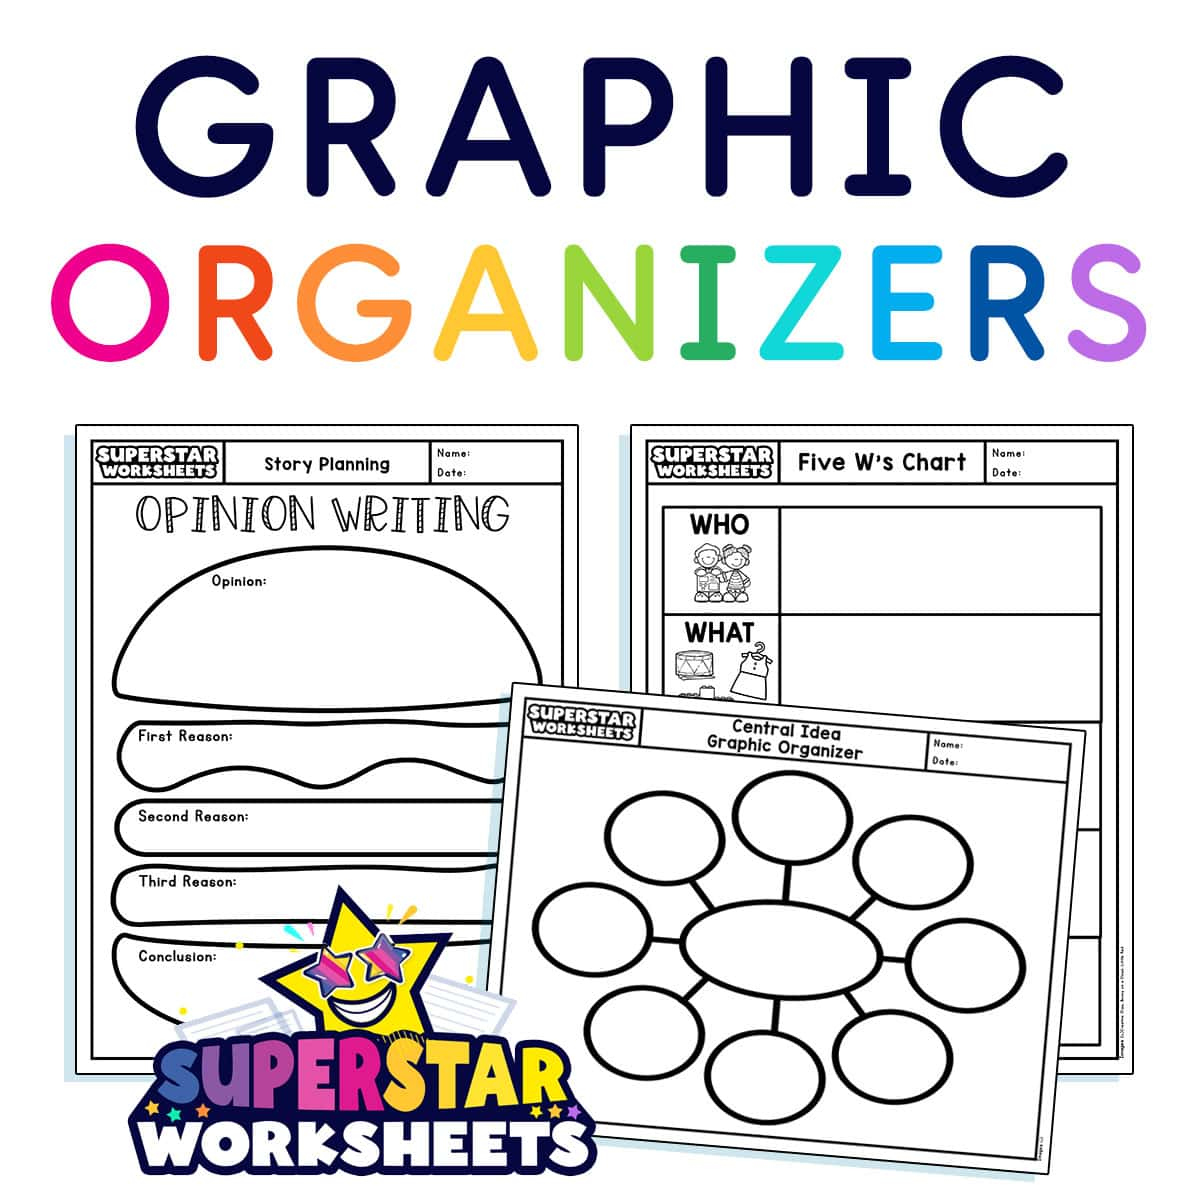 Graphic Organizers - Superstar Worksheets in Free Printable Graphic Organizers